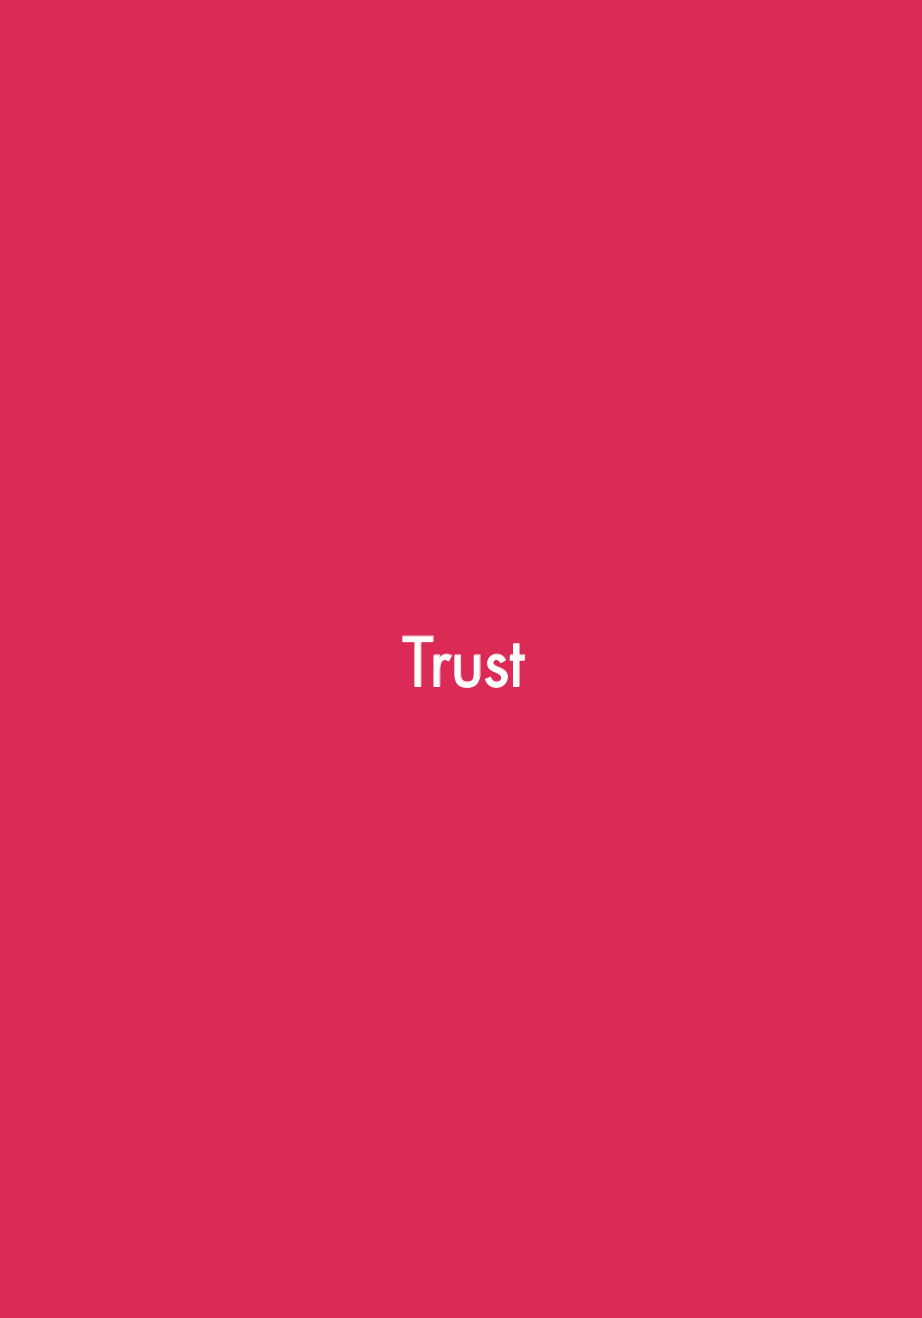 A title page from the book "Lovelier - The Goddess and The Dragon". Bright fuchsia background with white text that reads: "Trust."